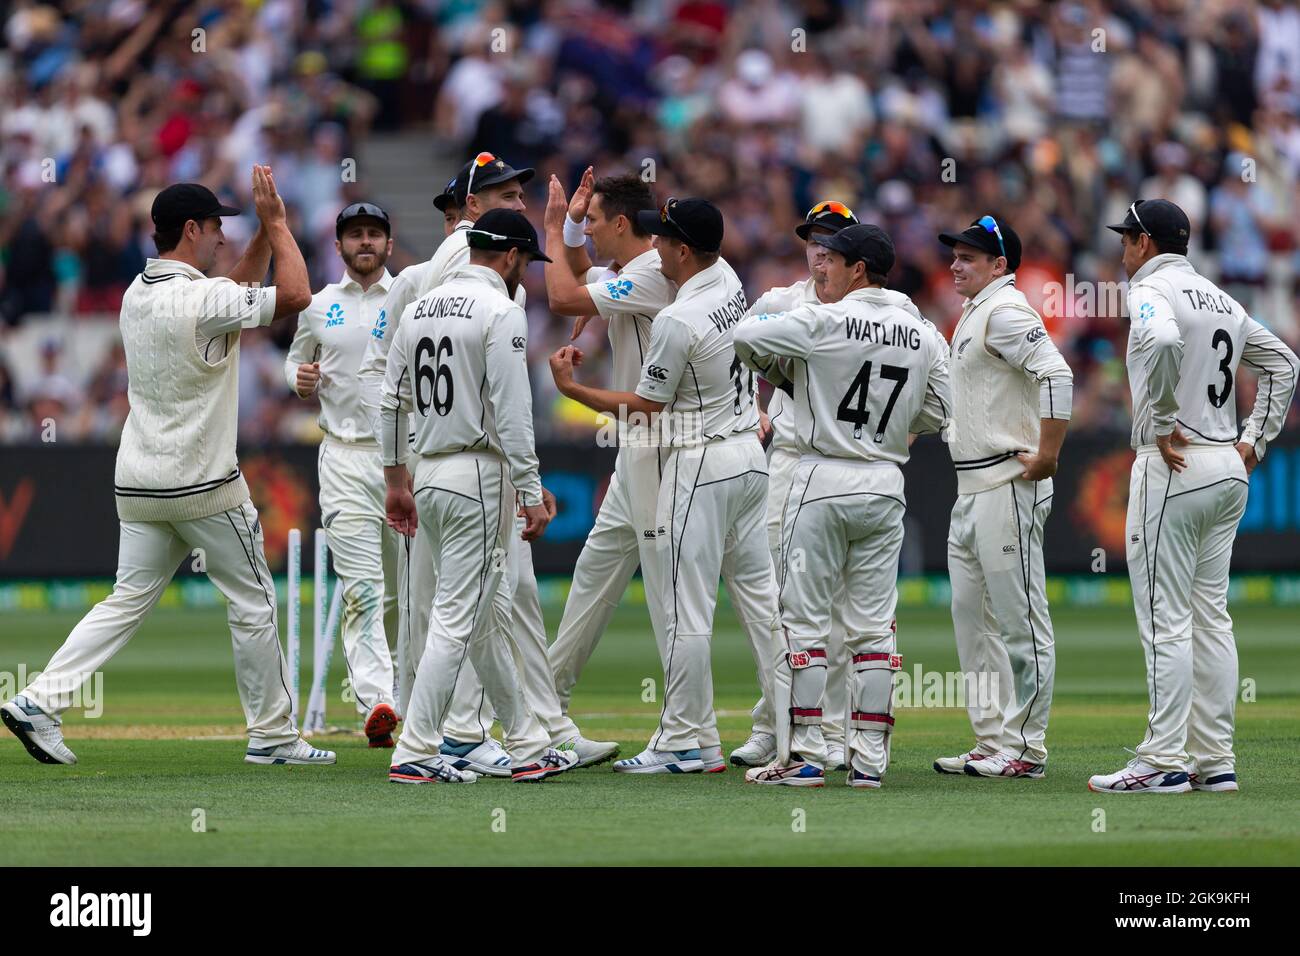 MELBOURNE, AUSTRALIA - DECEMBER 26: The New Zealand team celebrates a wicket during day one of the Second Test match in the series between Australia and New Zealand at The Melbourne Cricket Ground on December 26, 2019 in Melbourne, Australia.  Credit: Dave Hewison/Speed Media/Alamy Live News Stock Photo